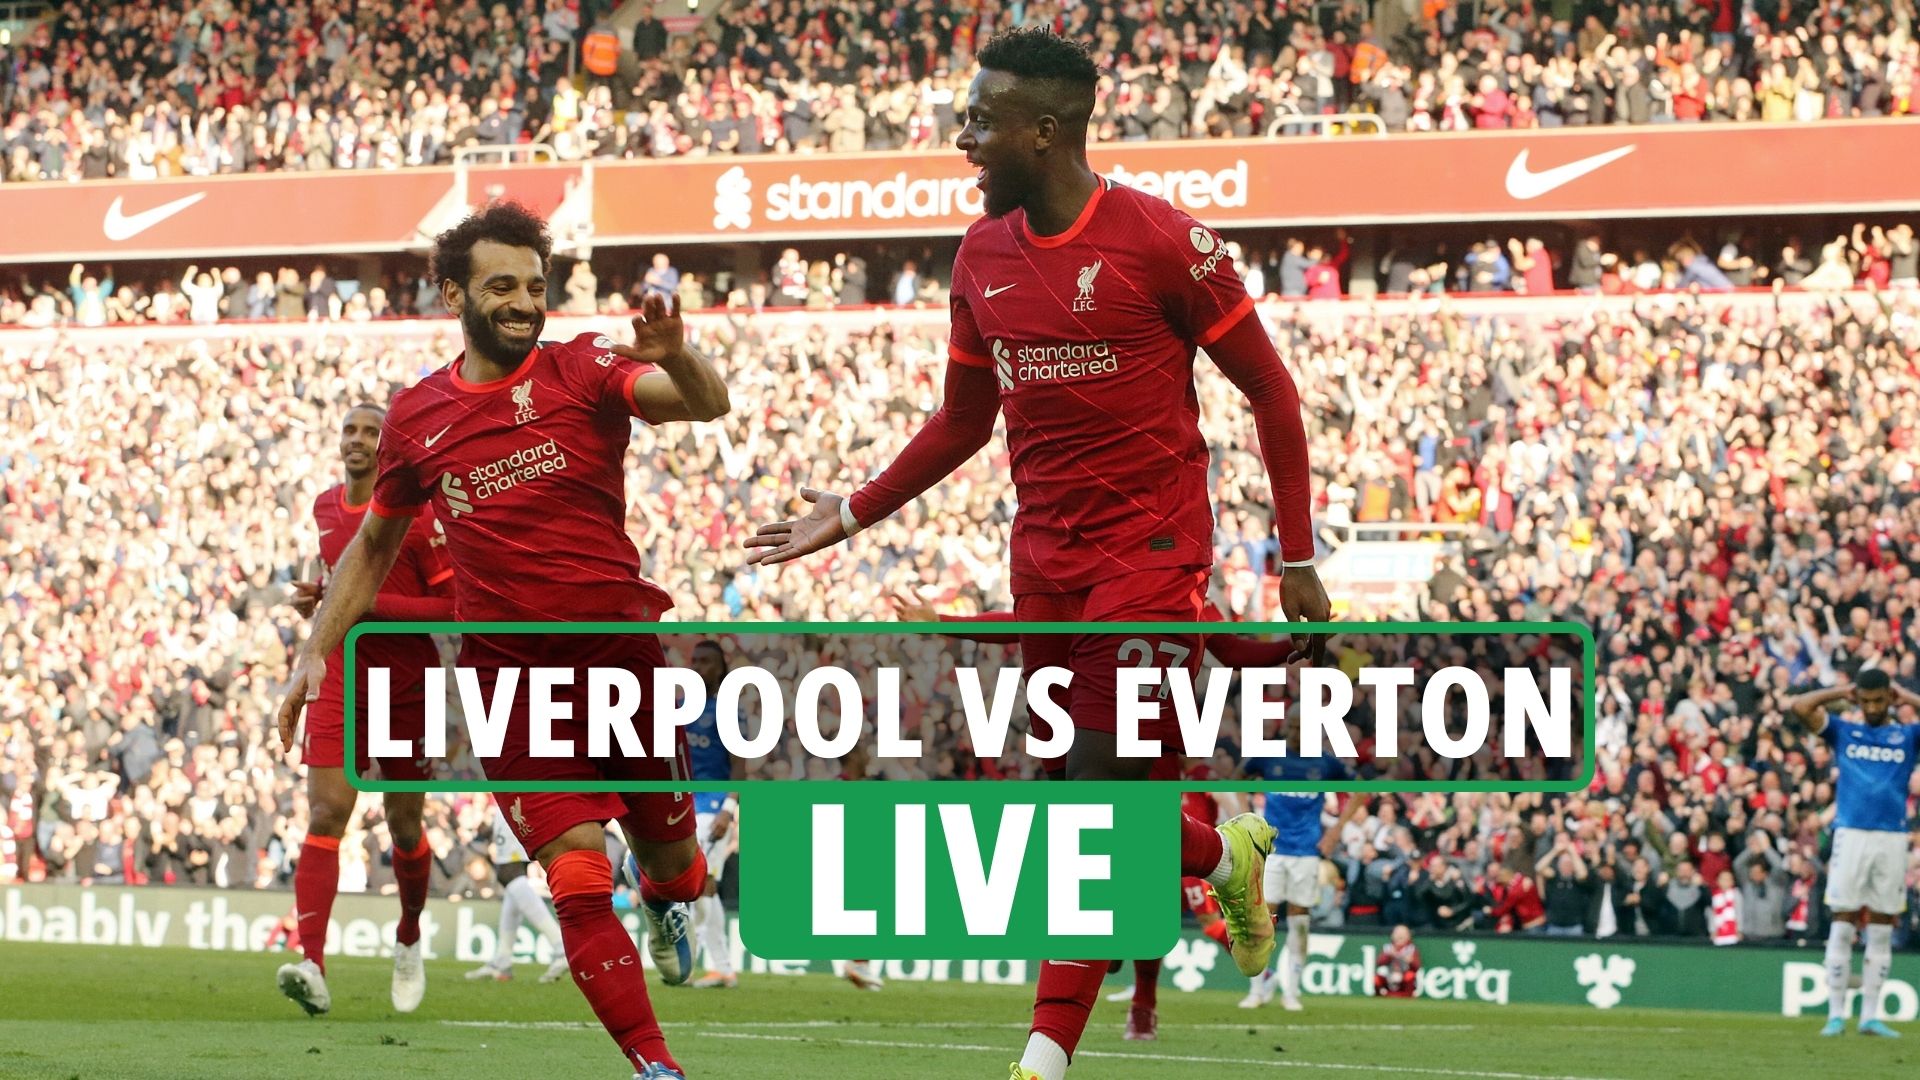 Liverpool vs Everton: TV channel, live stream, kick-off time and team news